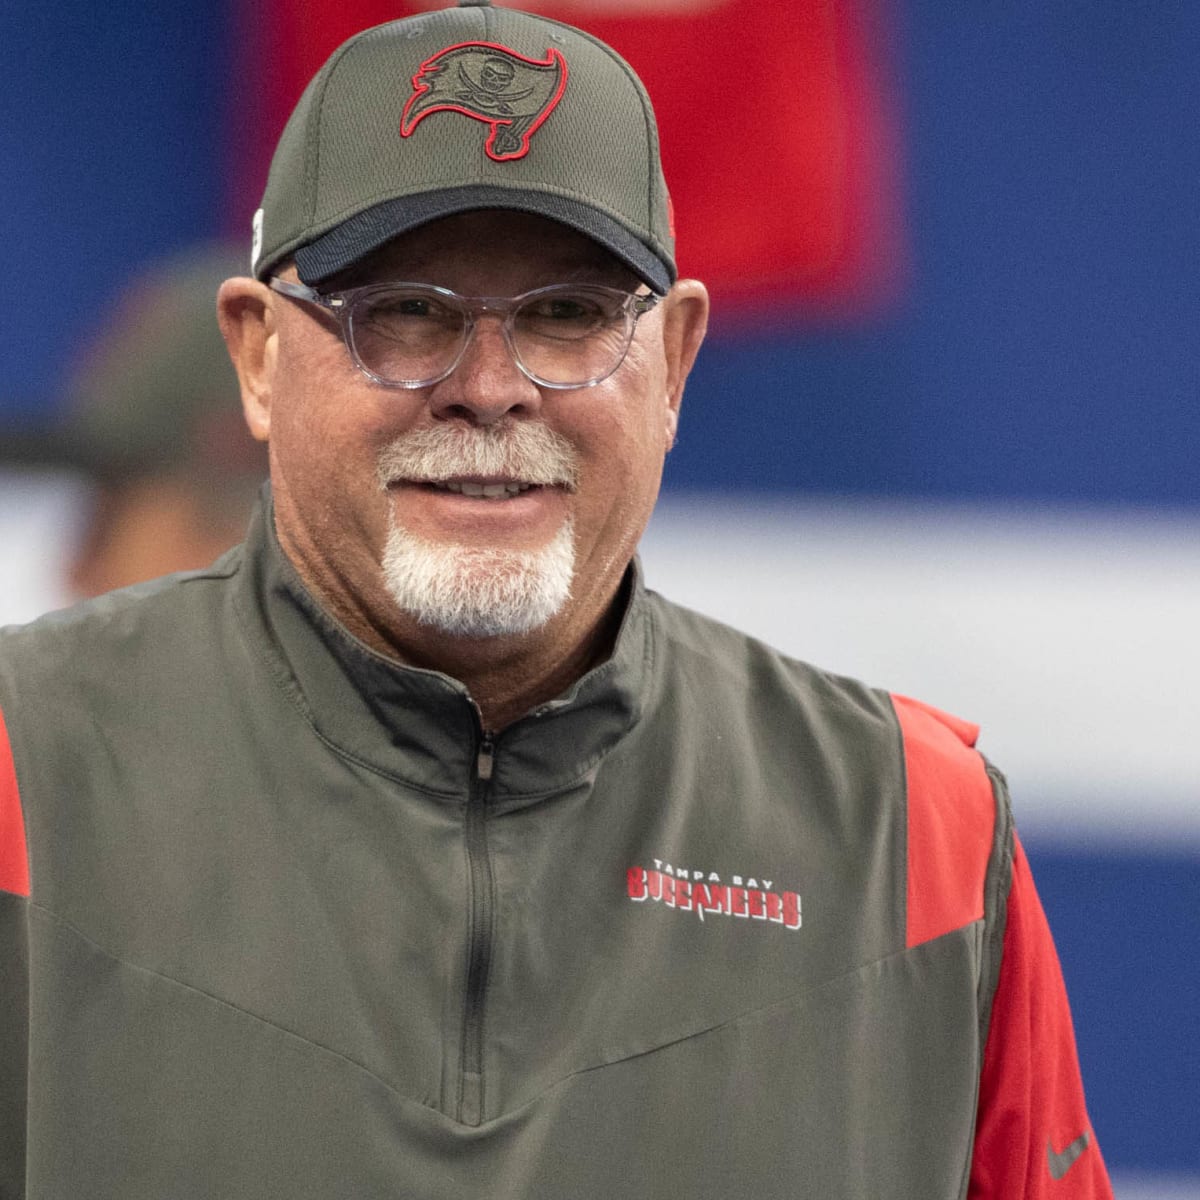 Bruce Arians retires leaving the NFL coaching world better than he found it  - Sports Illustrated